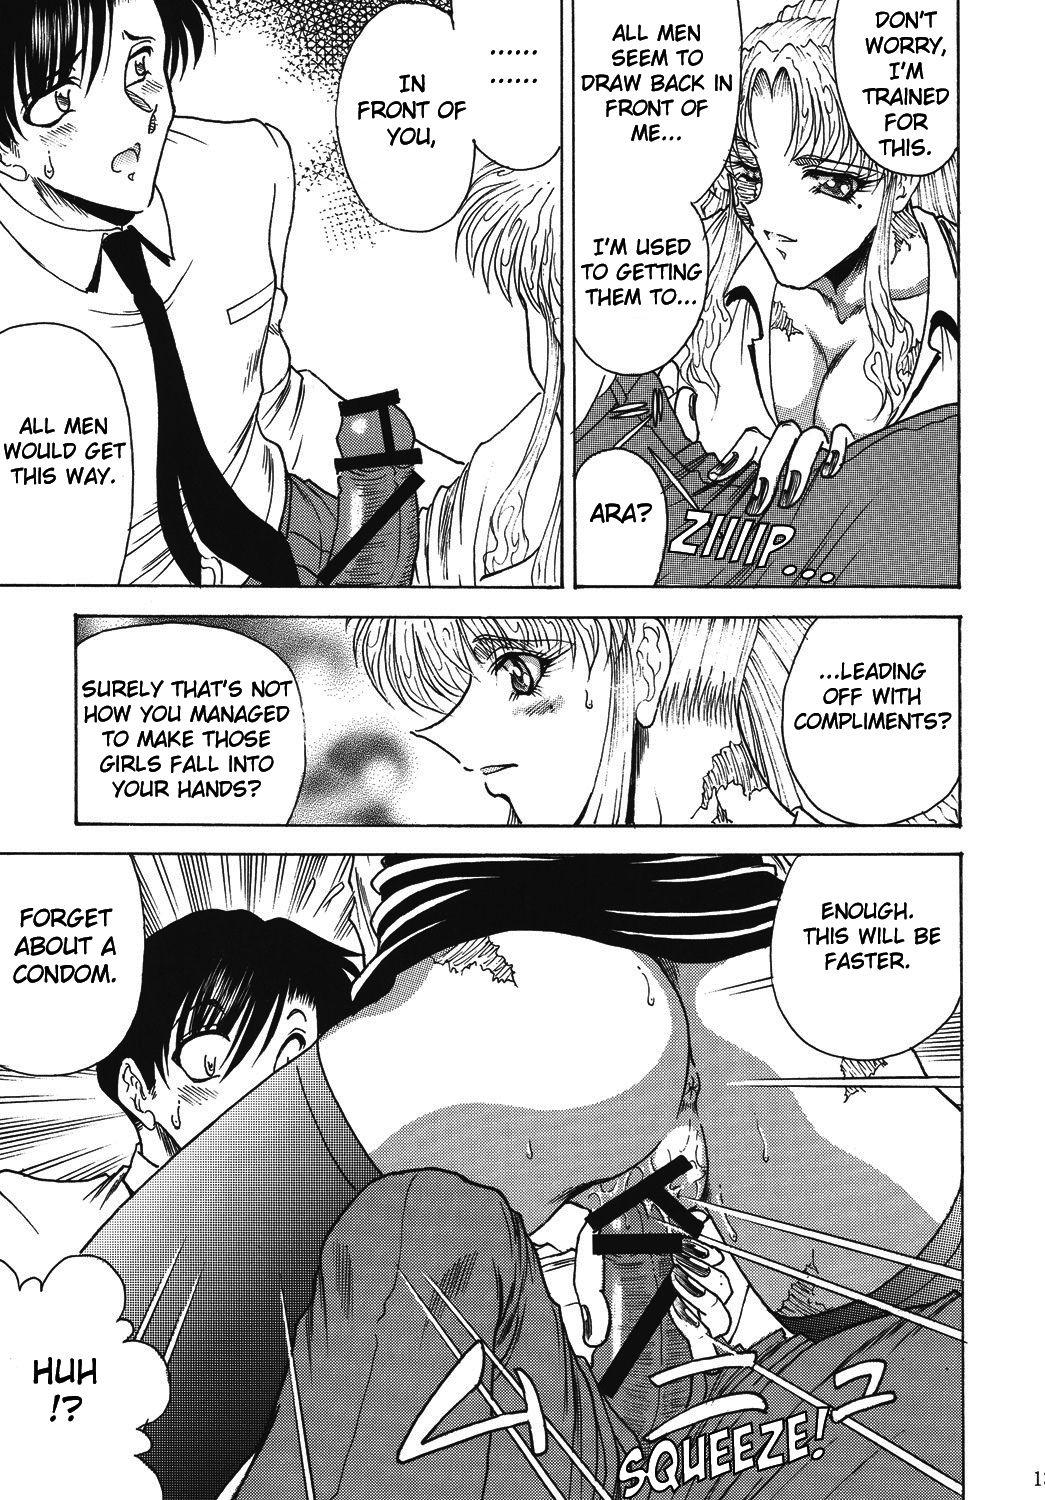 Best Blow Jobs Ever ZONE 39 From Rossia With Love - Black lagoon Beautiful - Page 12